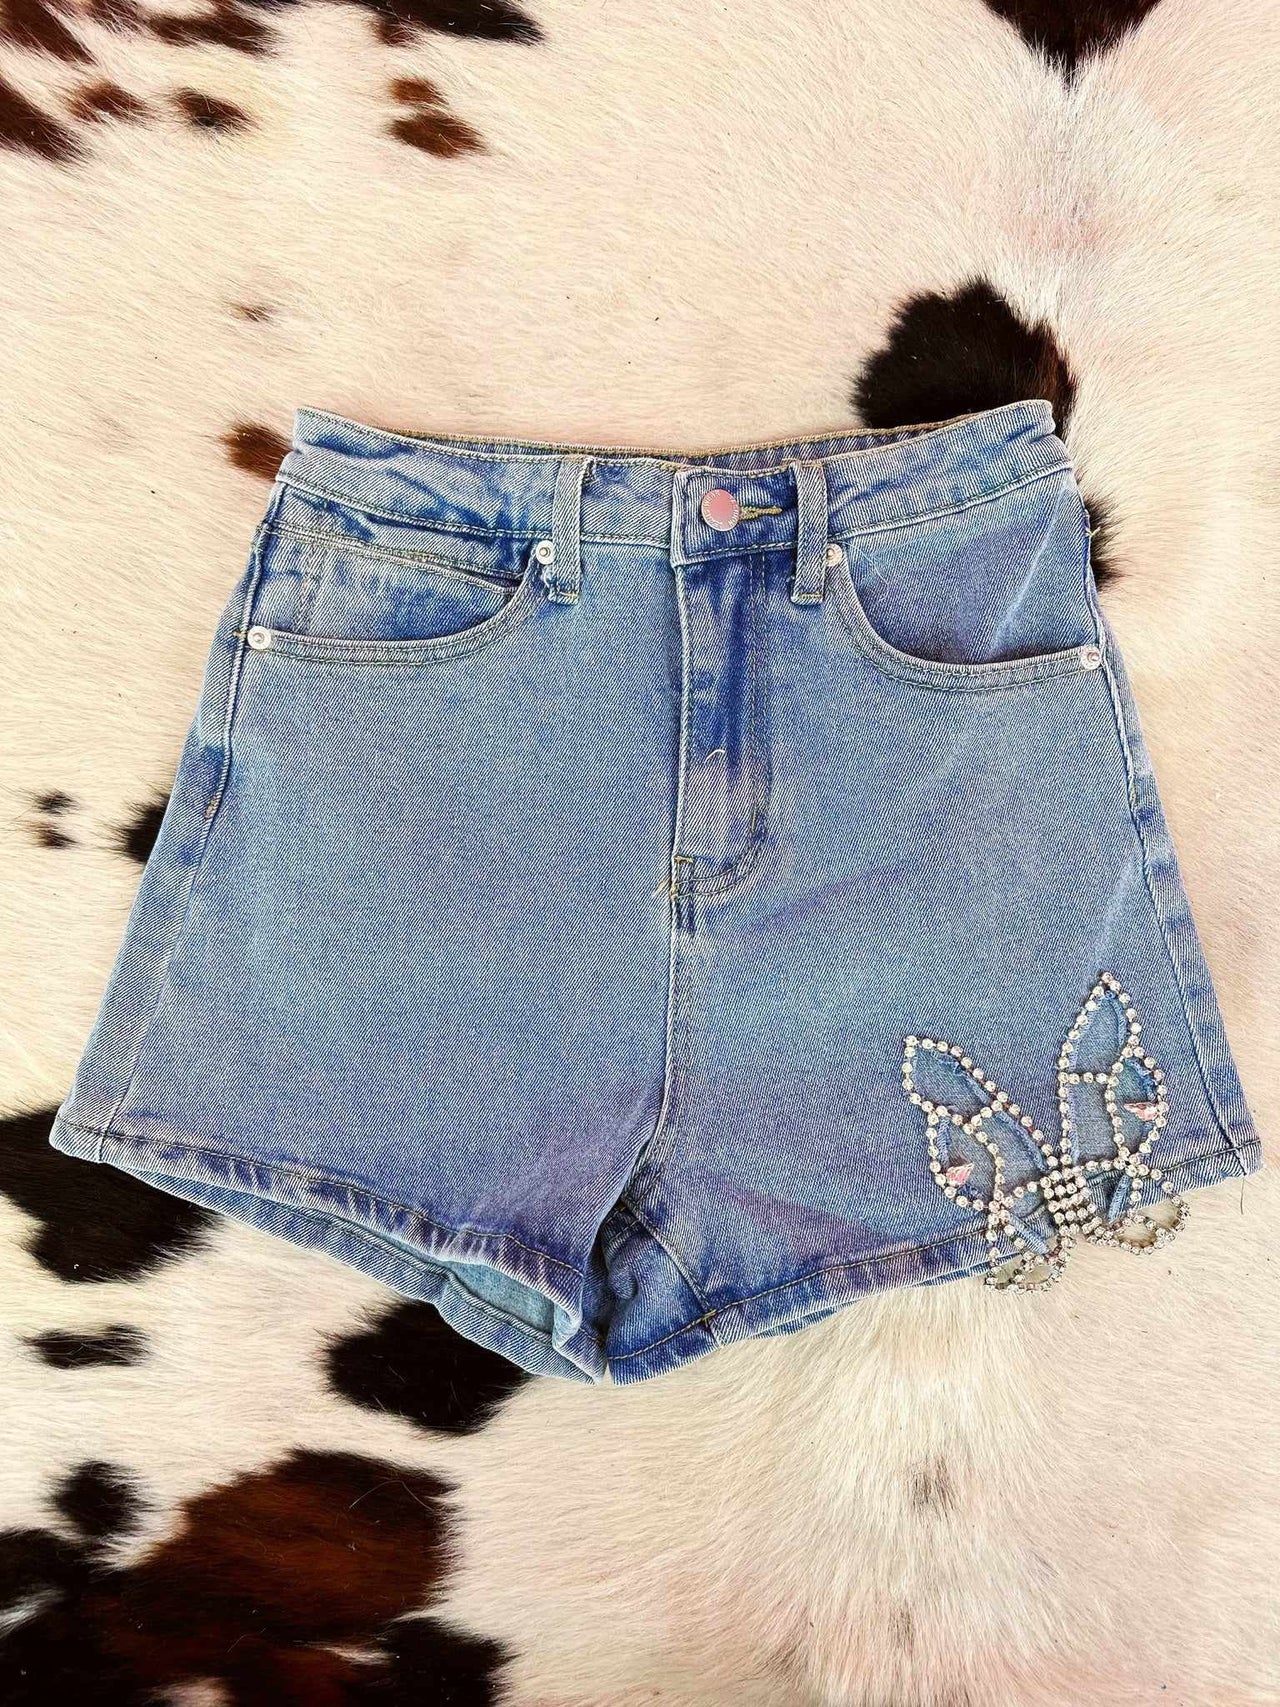 Jean shorts with rhinestone butterfly